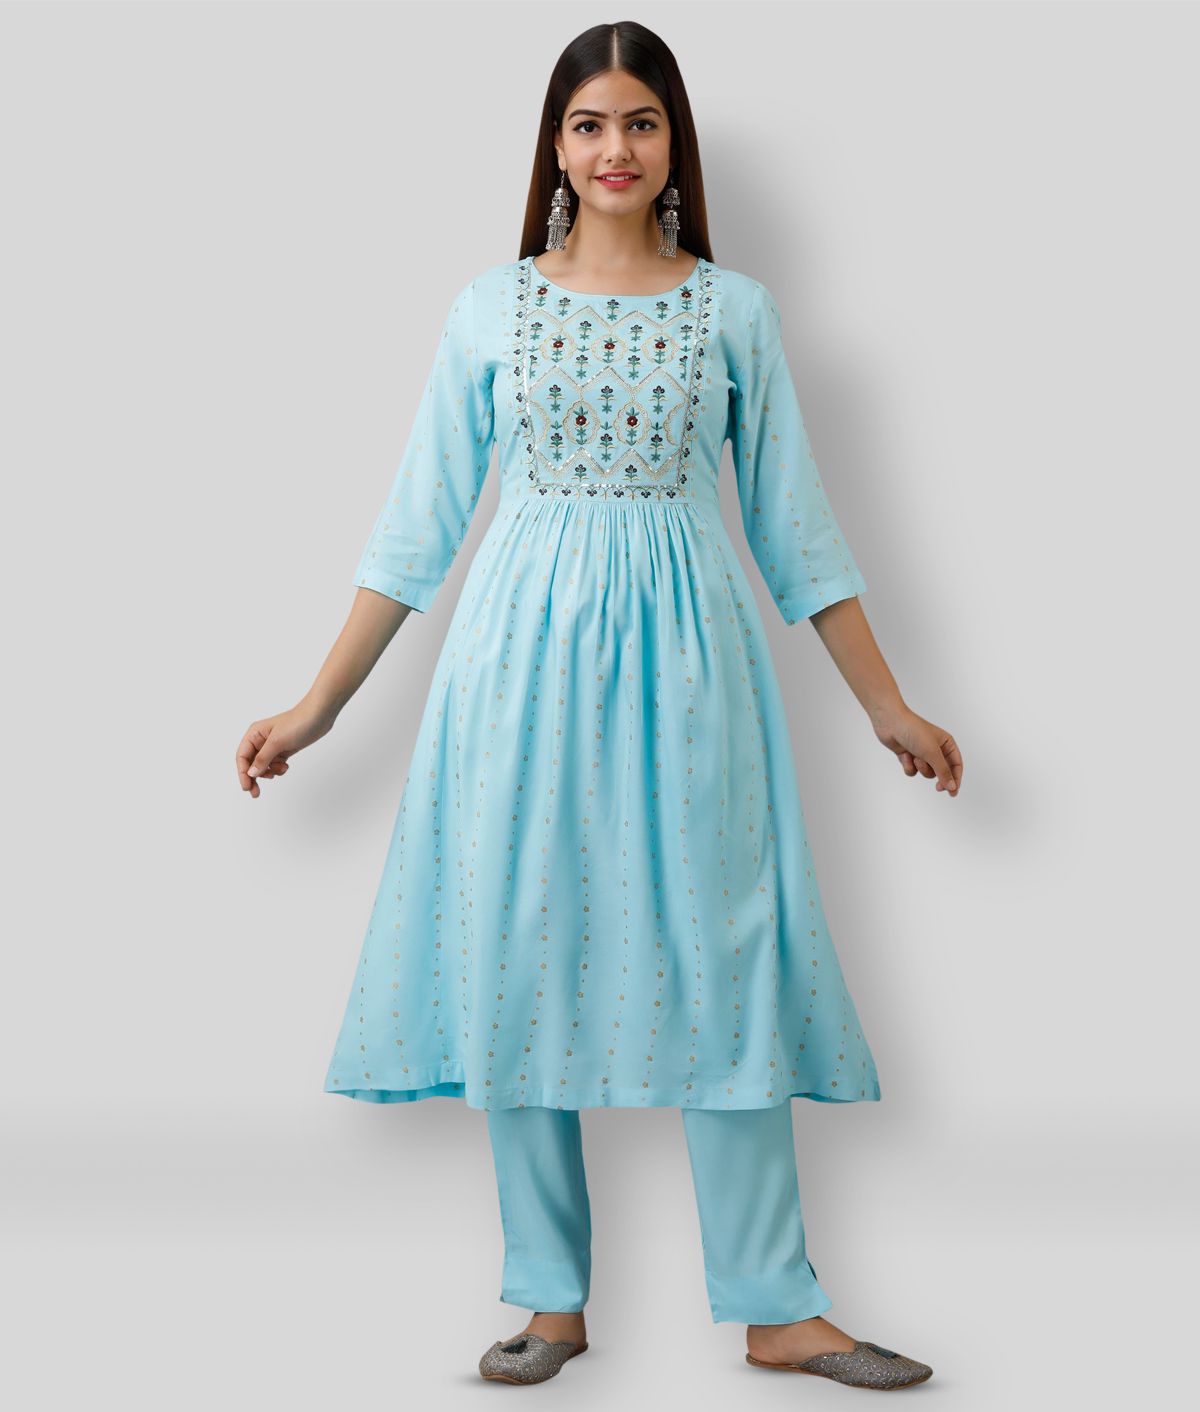     			Frionkandy - Light Blue Frock Style Rayon Women's Stitched Salwar Suit ( Pack of 1 )